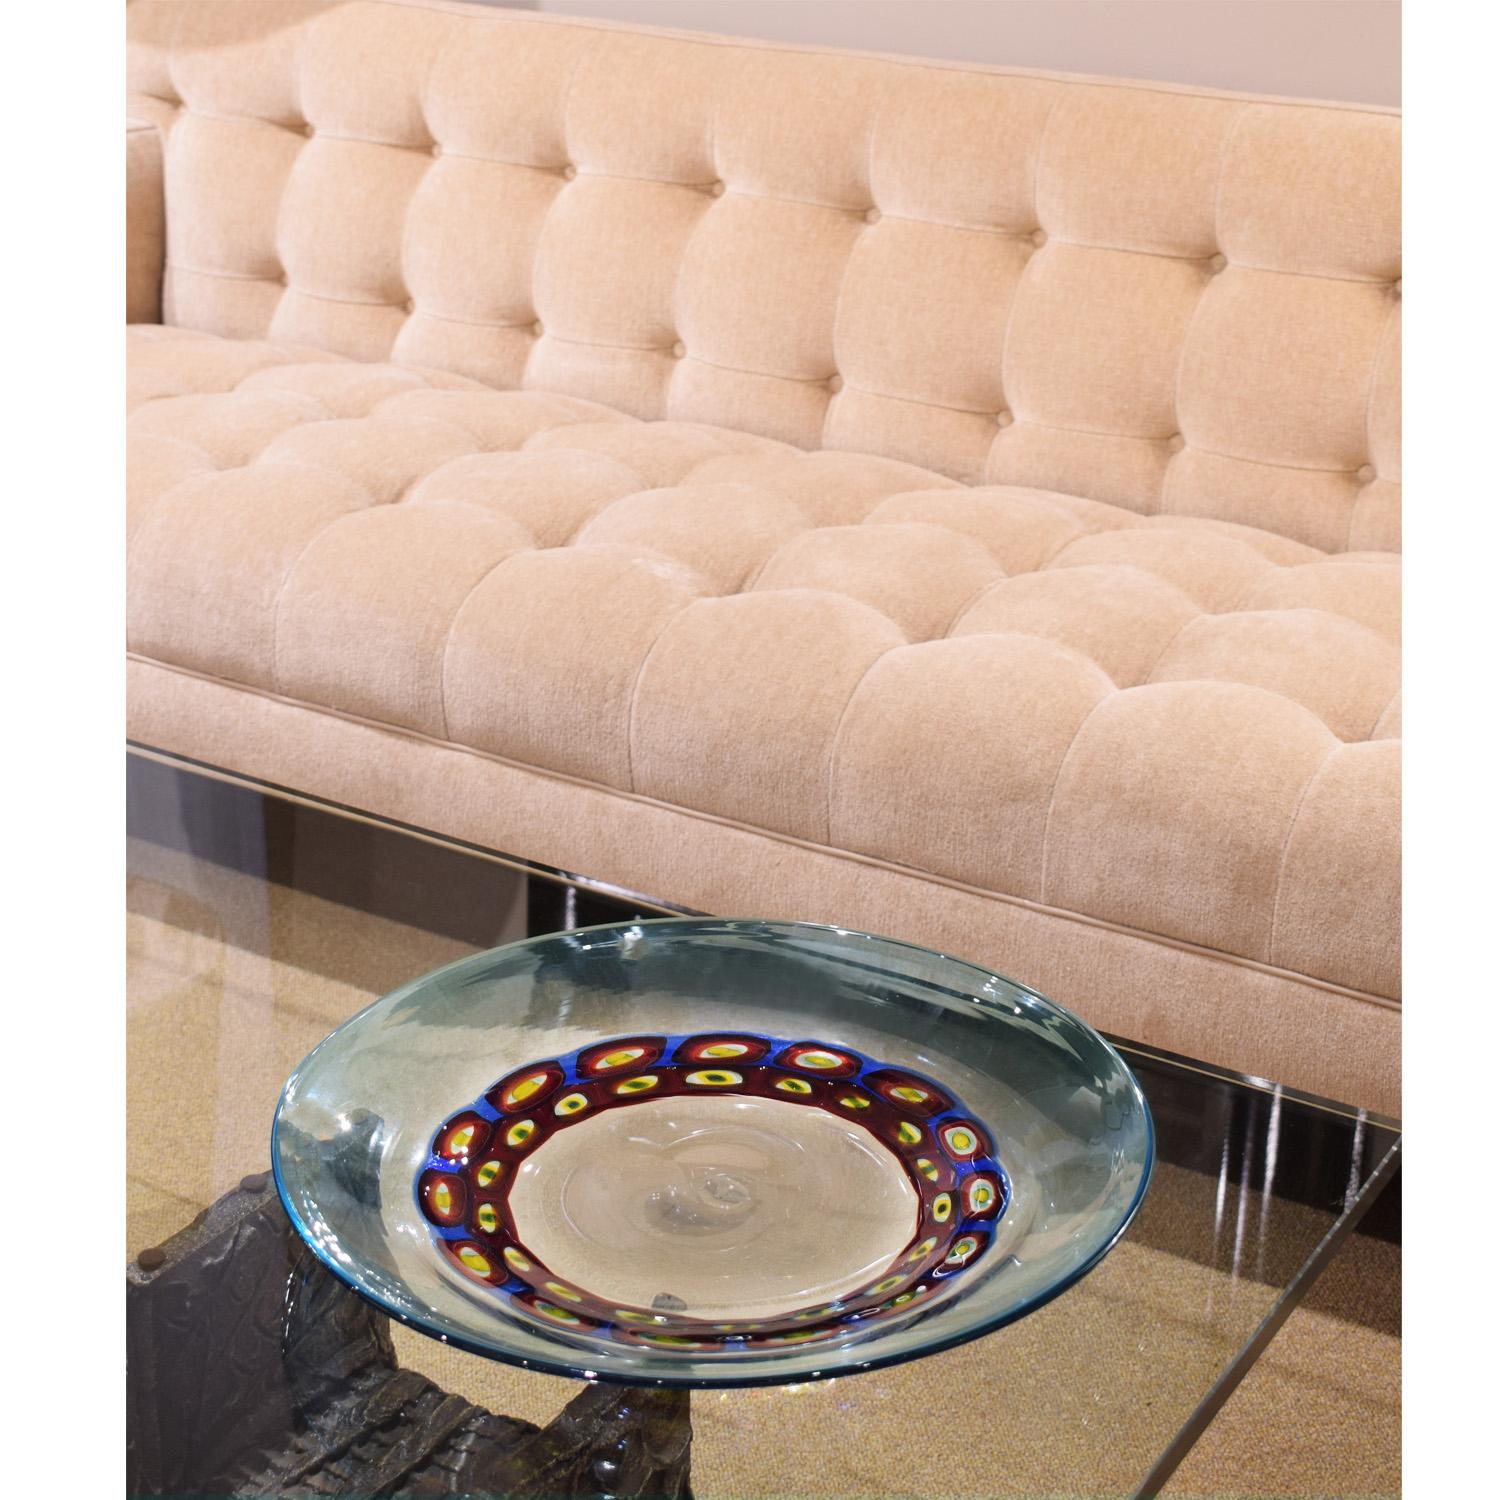 Italian Anzolo Fuga Hand-Blown Glass Charger with Rings of Murrhines 1950s For Sale